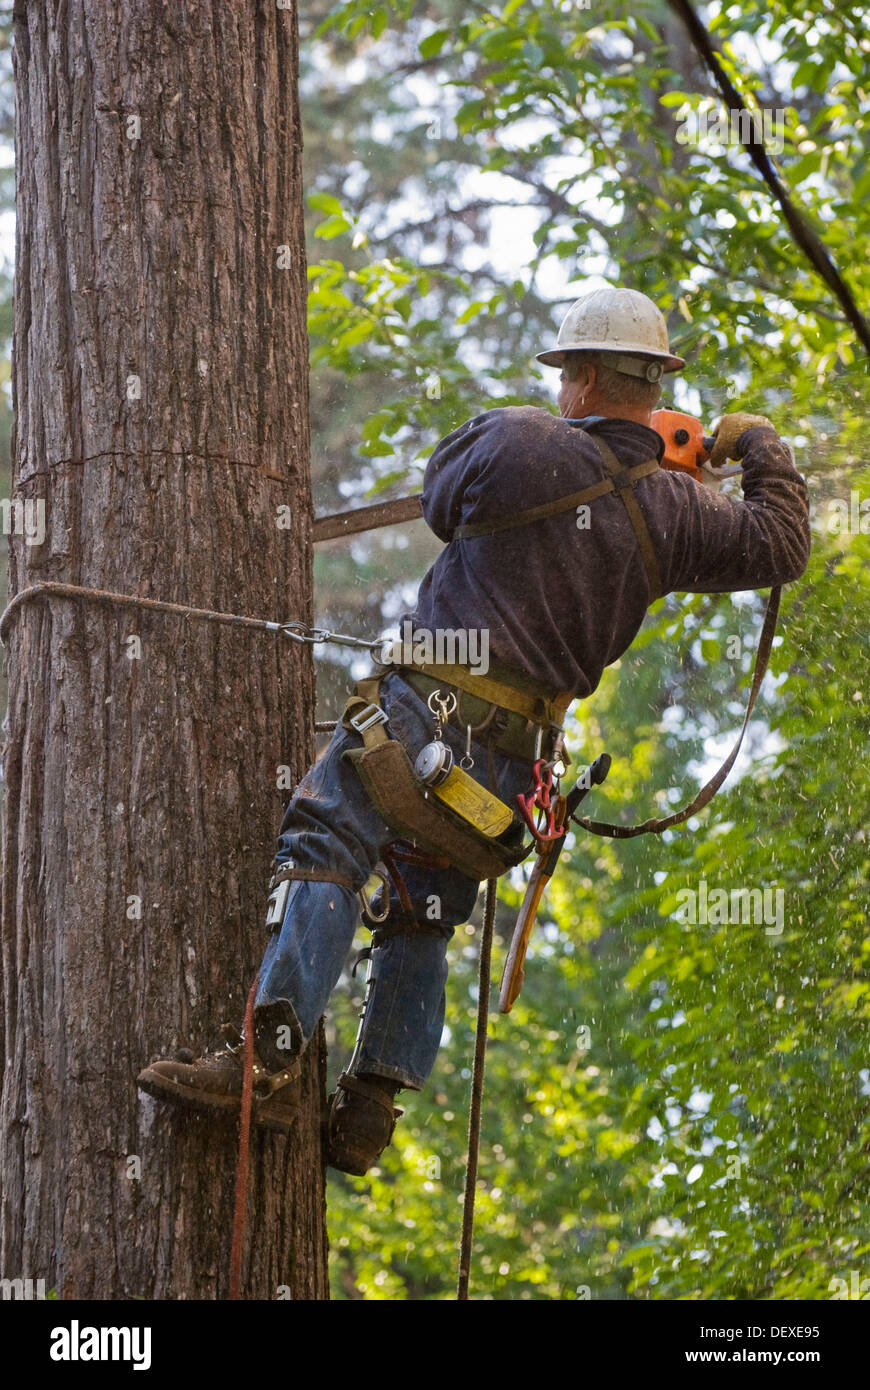 Logger high above ground cutting top off tree, crane holding top section Stock Photo